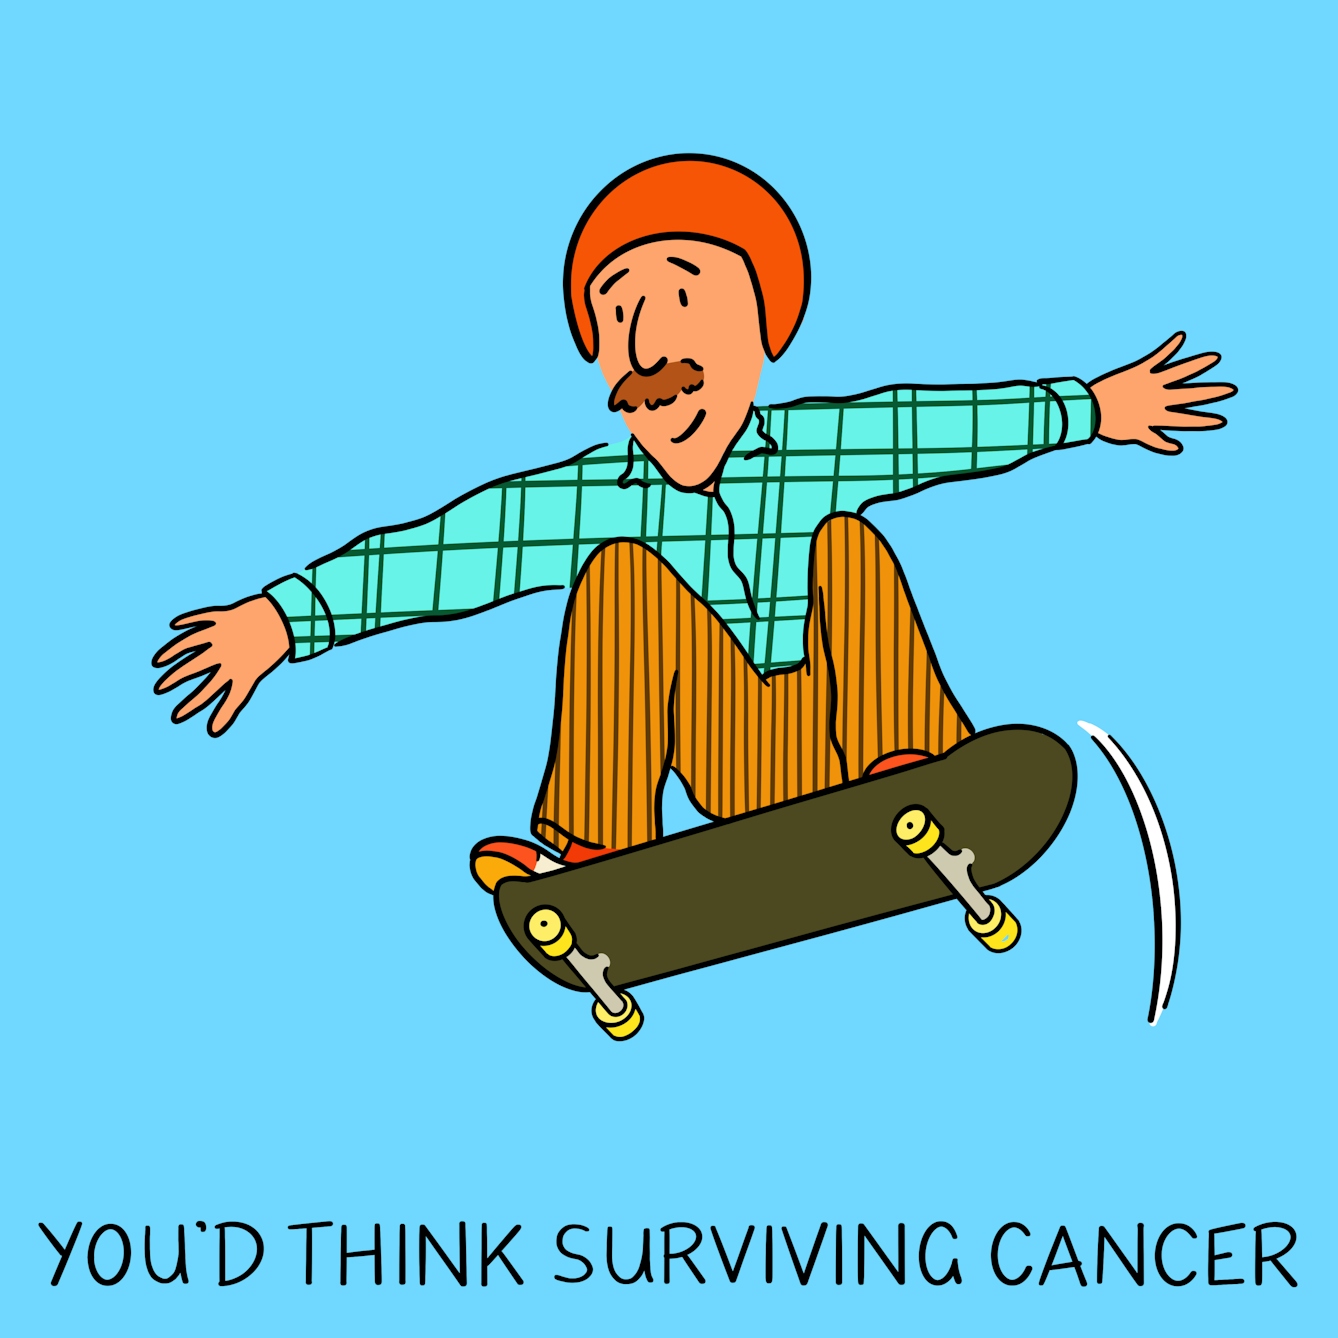 Panel 1 of a four-panel comic drawn digitally: a white man with a moustache, corduroy trousers and a plaid shirt wears a bright orange helmet and a smile as he leaps into the air on a skateboard. The caption text reads "You'd think having cancer..."